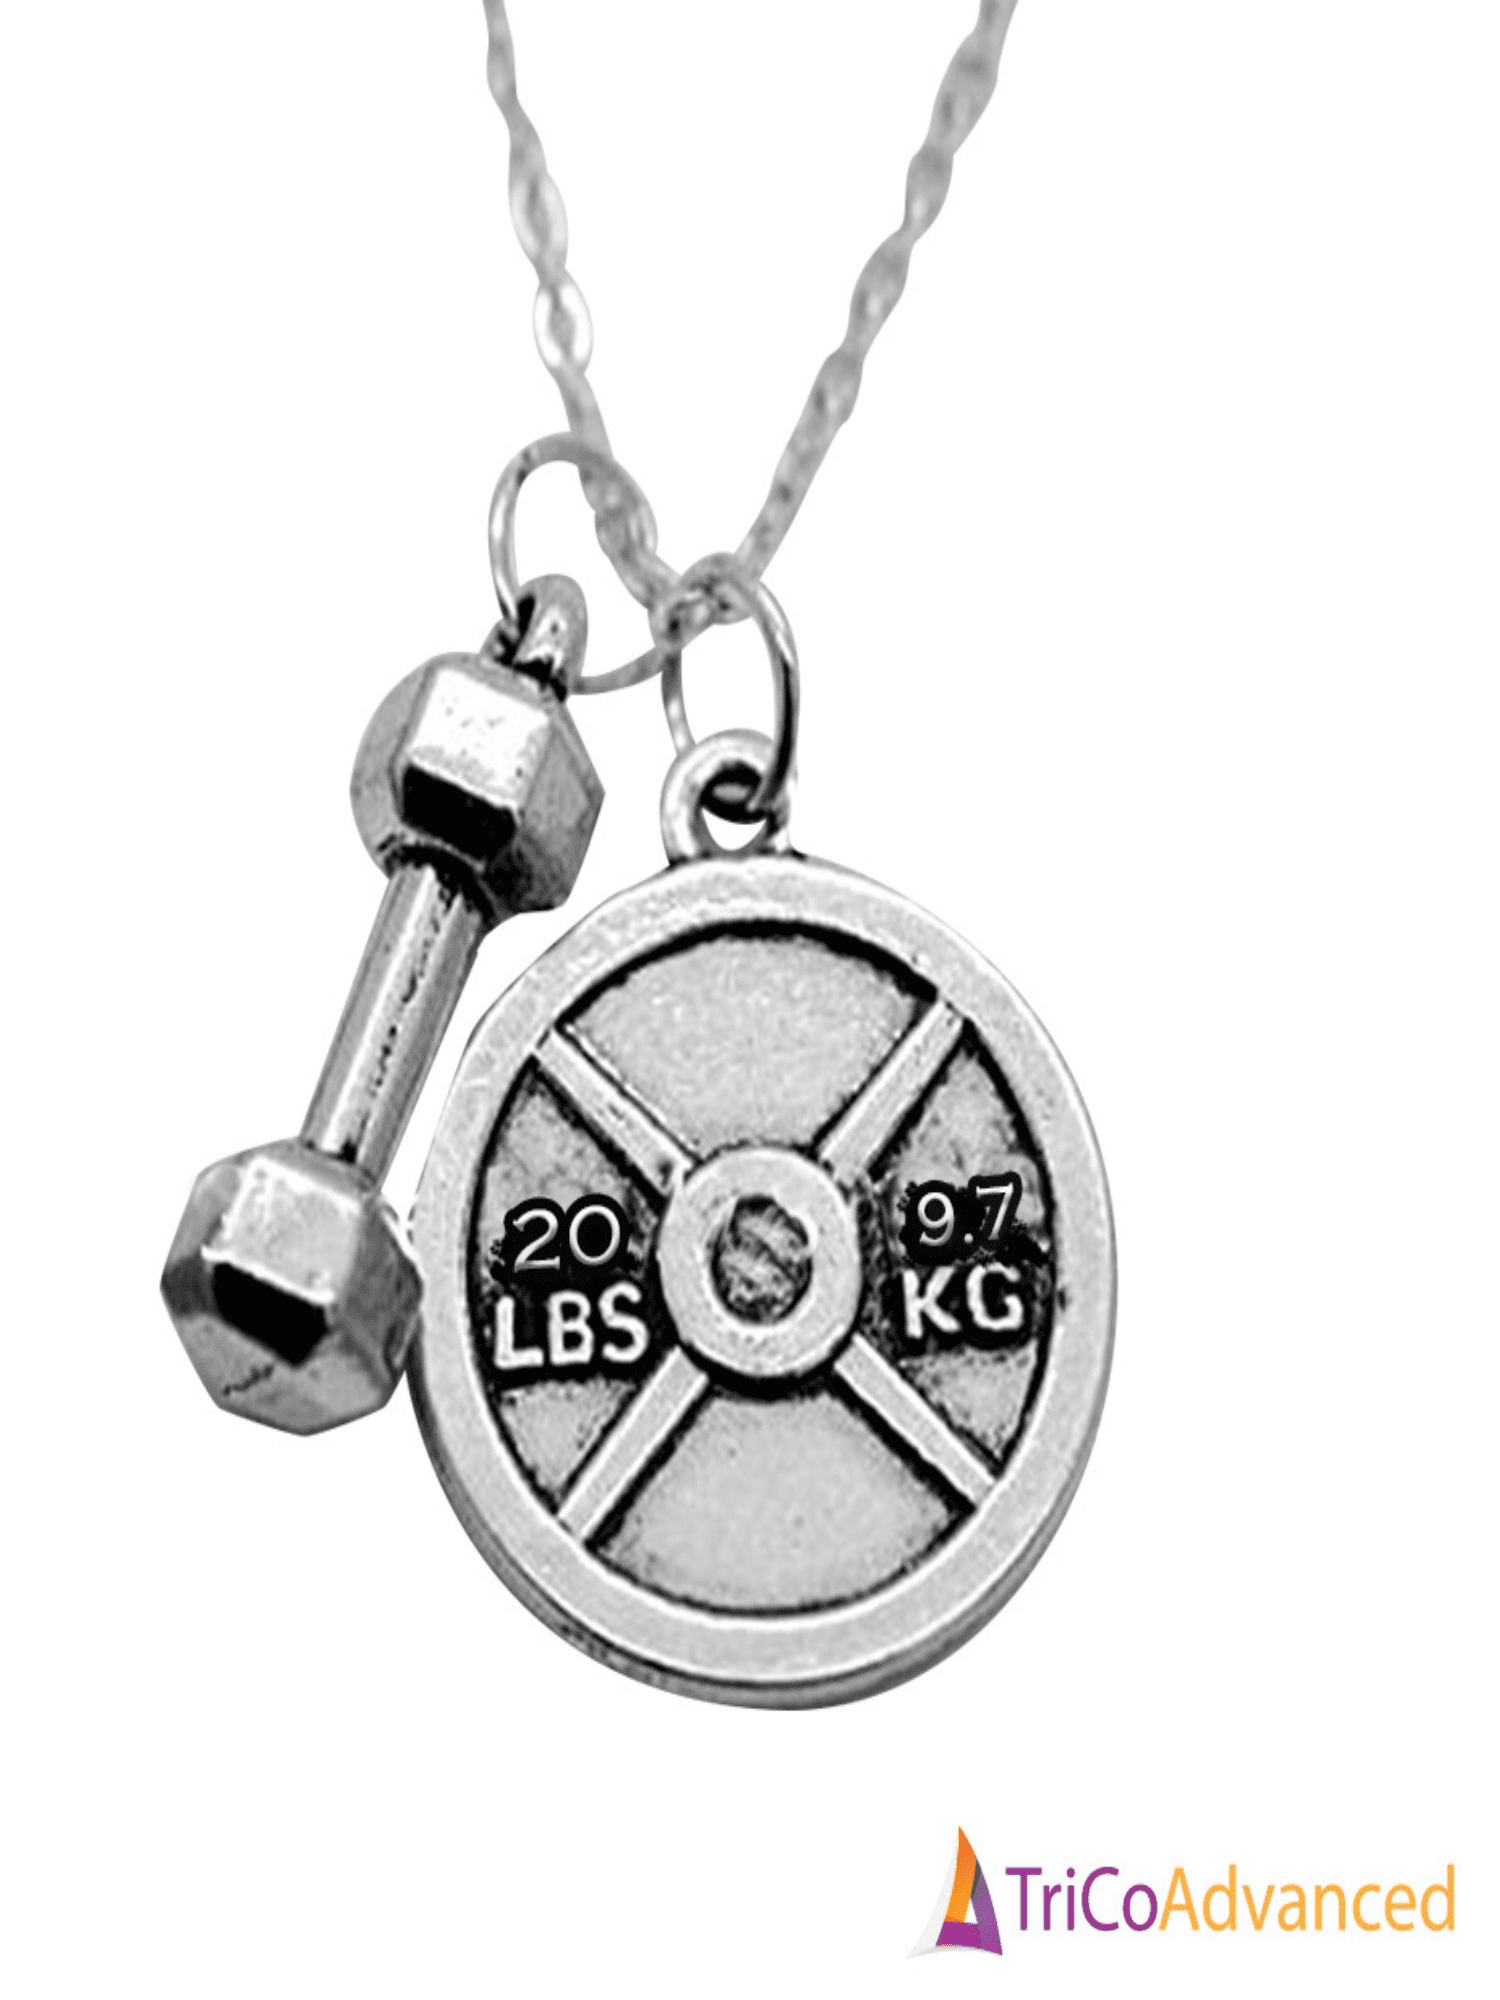 No Pain No Gain Pendant Gym Necklace 925 Sterling Silver Bodybuilding Fitness Jewelry Weight Plate Medallion Motivation gift